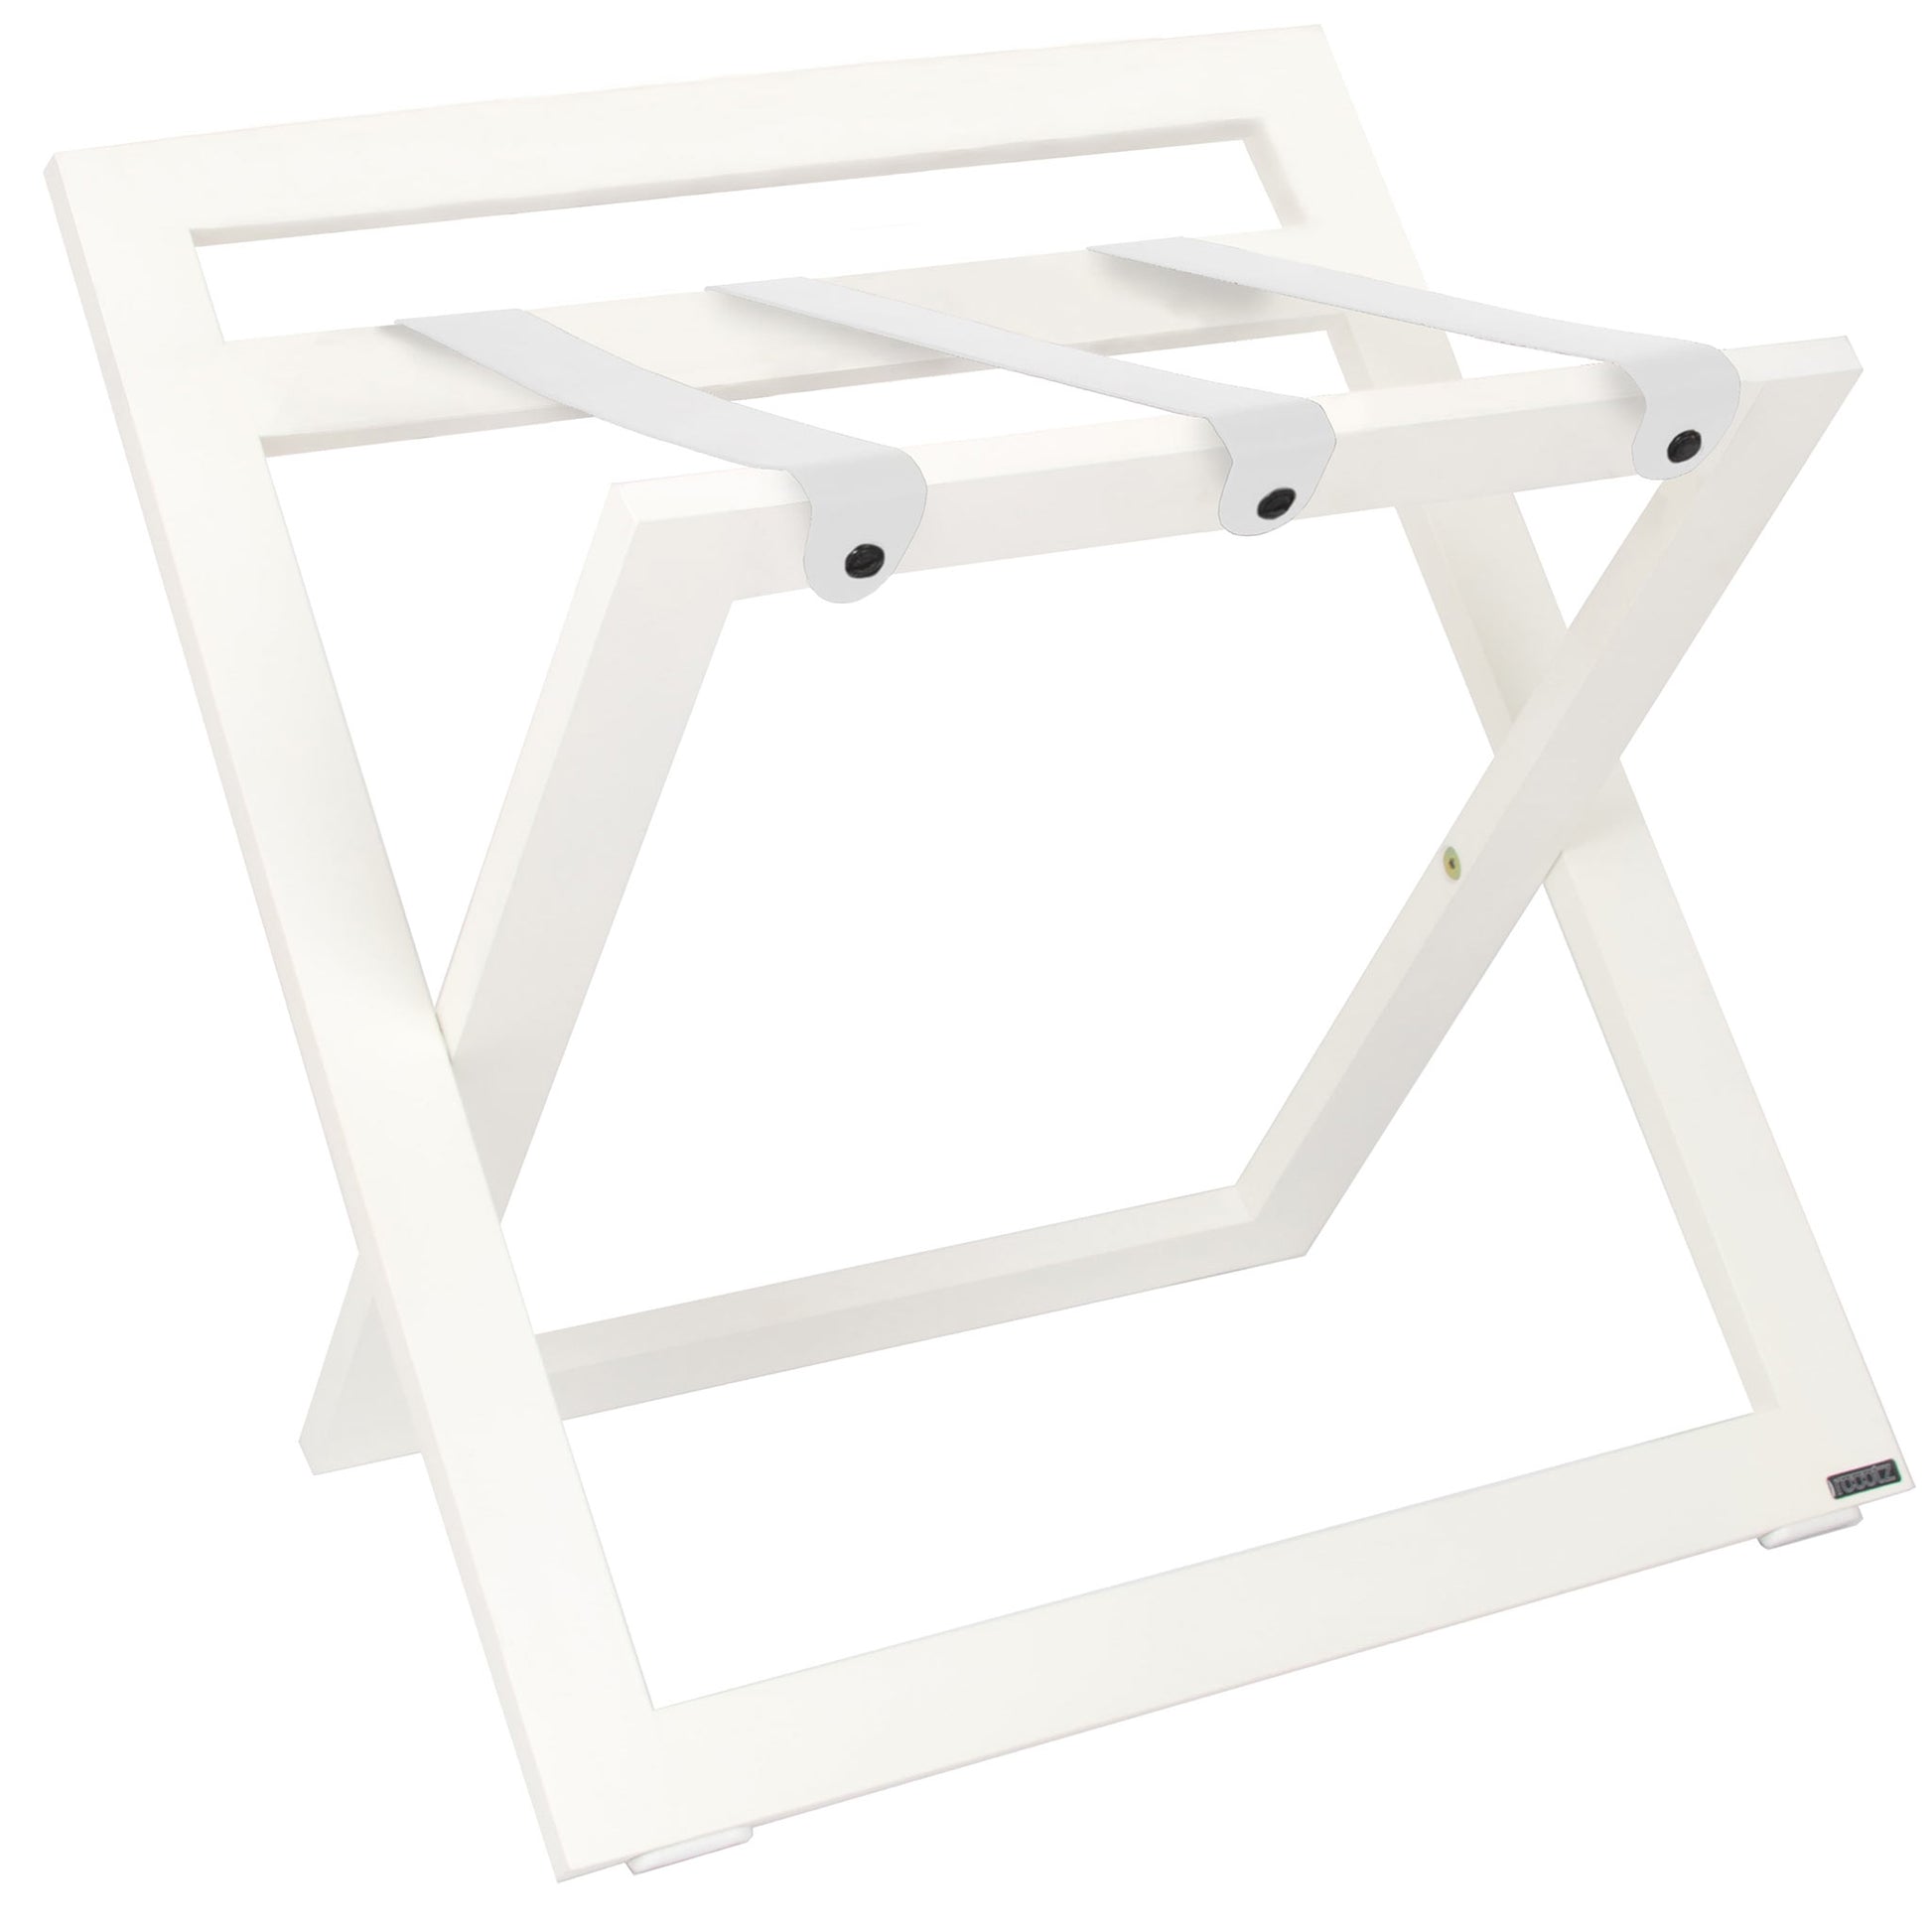 Roootz compact white wooden hotel luggage rack with white leather straps and backstand